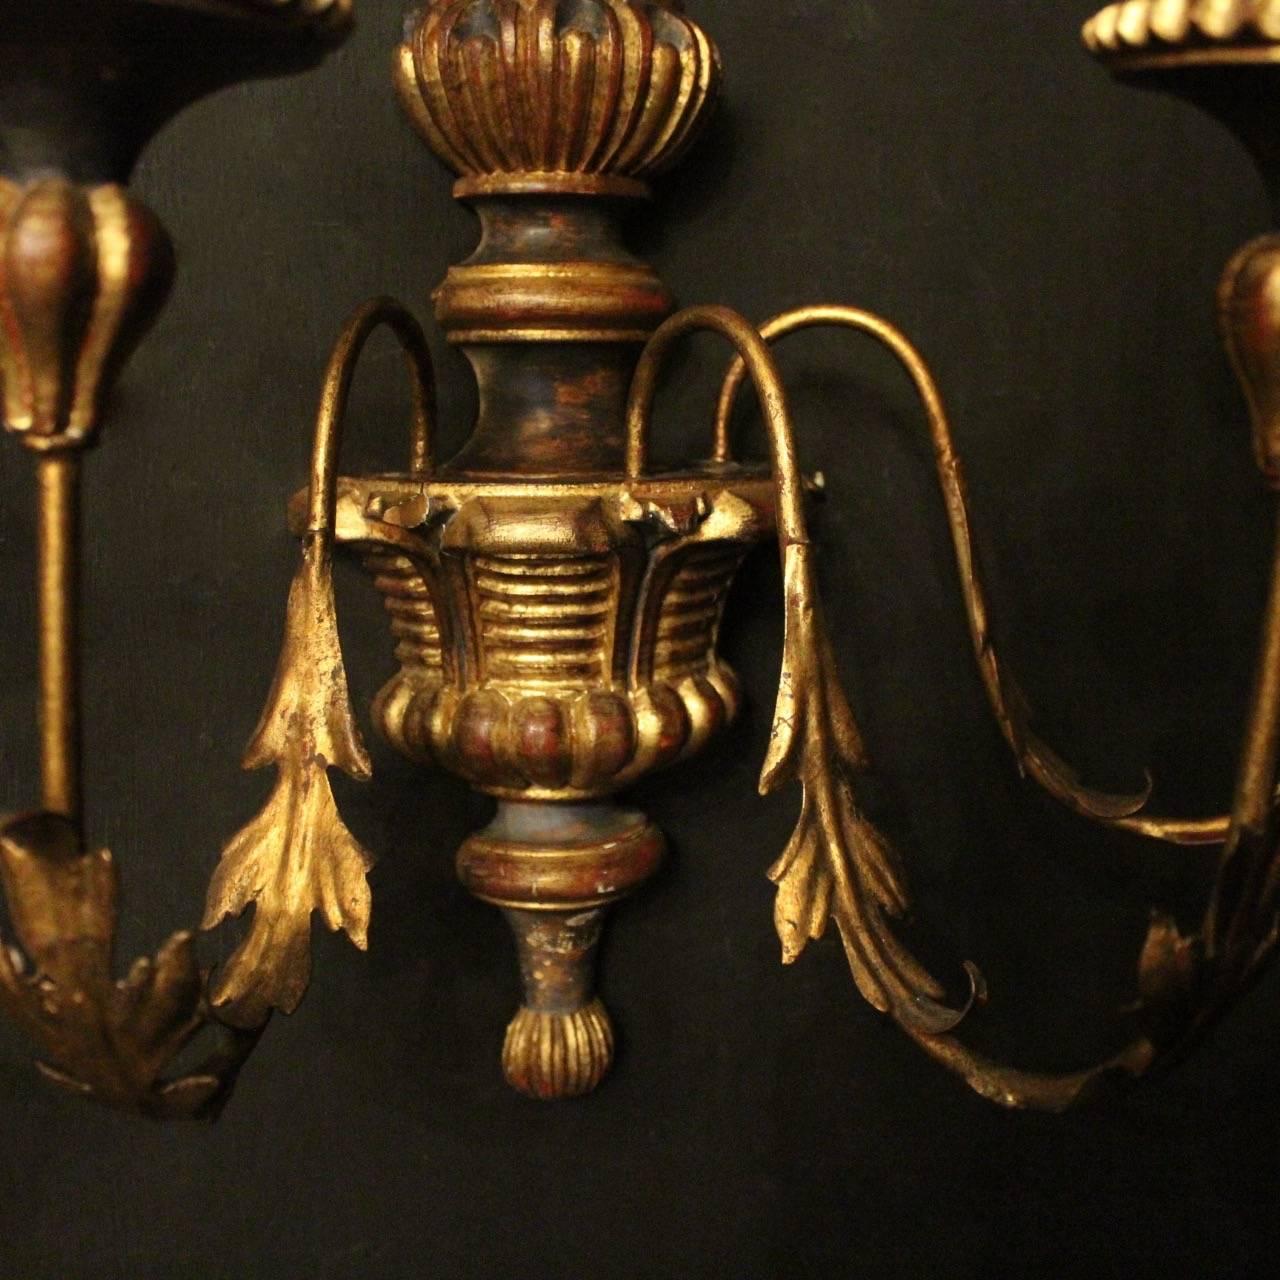 A decorative Italian florentine carved giltwood and toleware triple-arm wall lights, the foliated toleware acanthus leaf scrolling arms with wooden sectional bobeche drip pans and bulbous candle sconces, issuing from an ornate reeded bulbous wooden